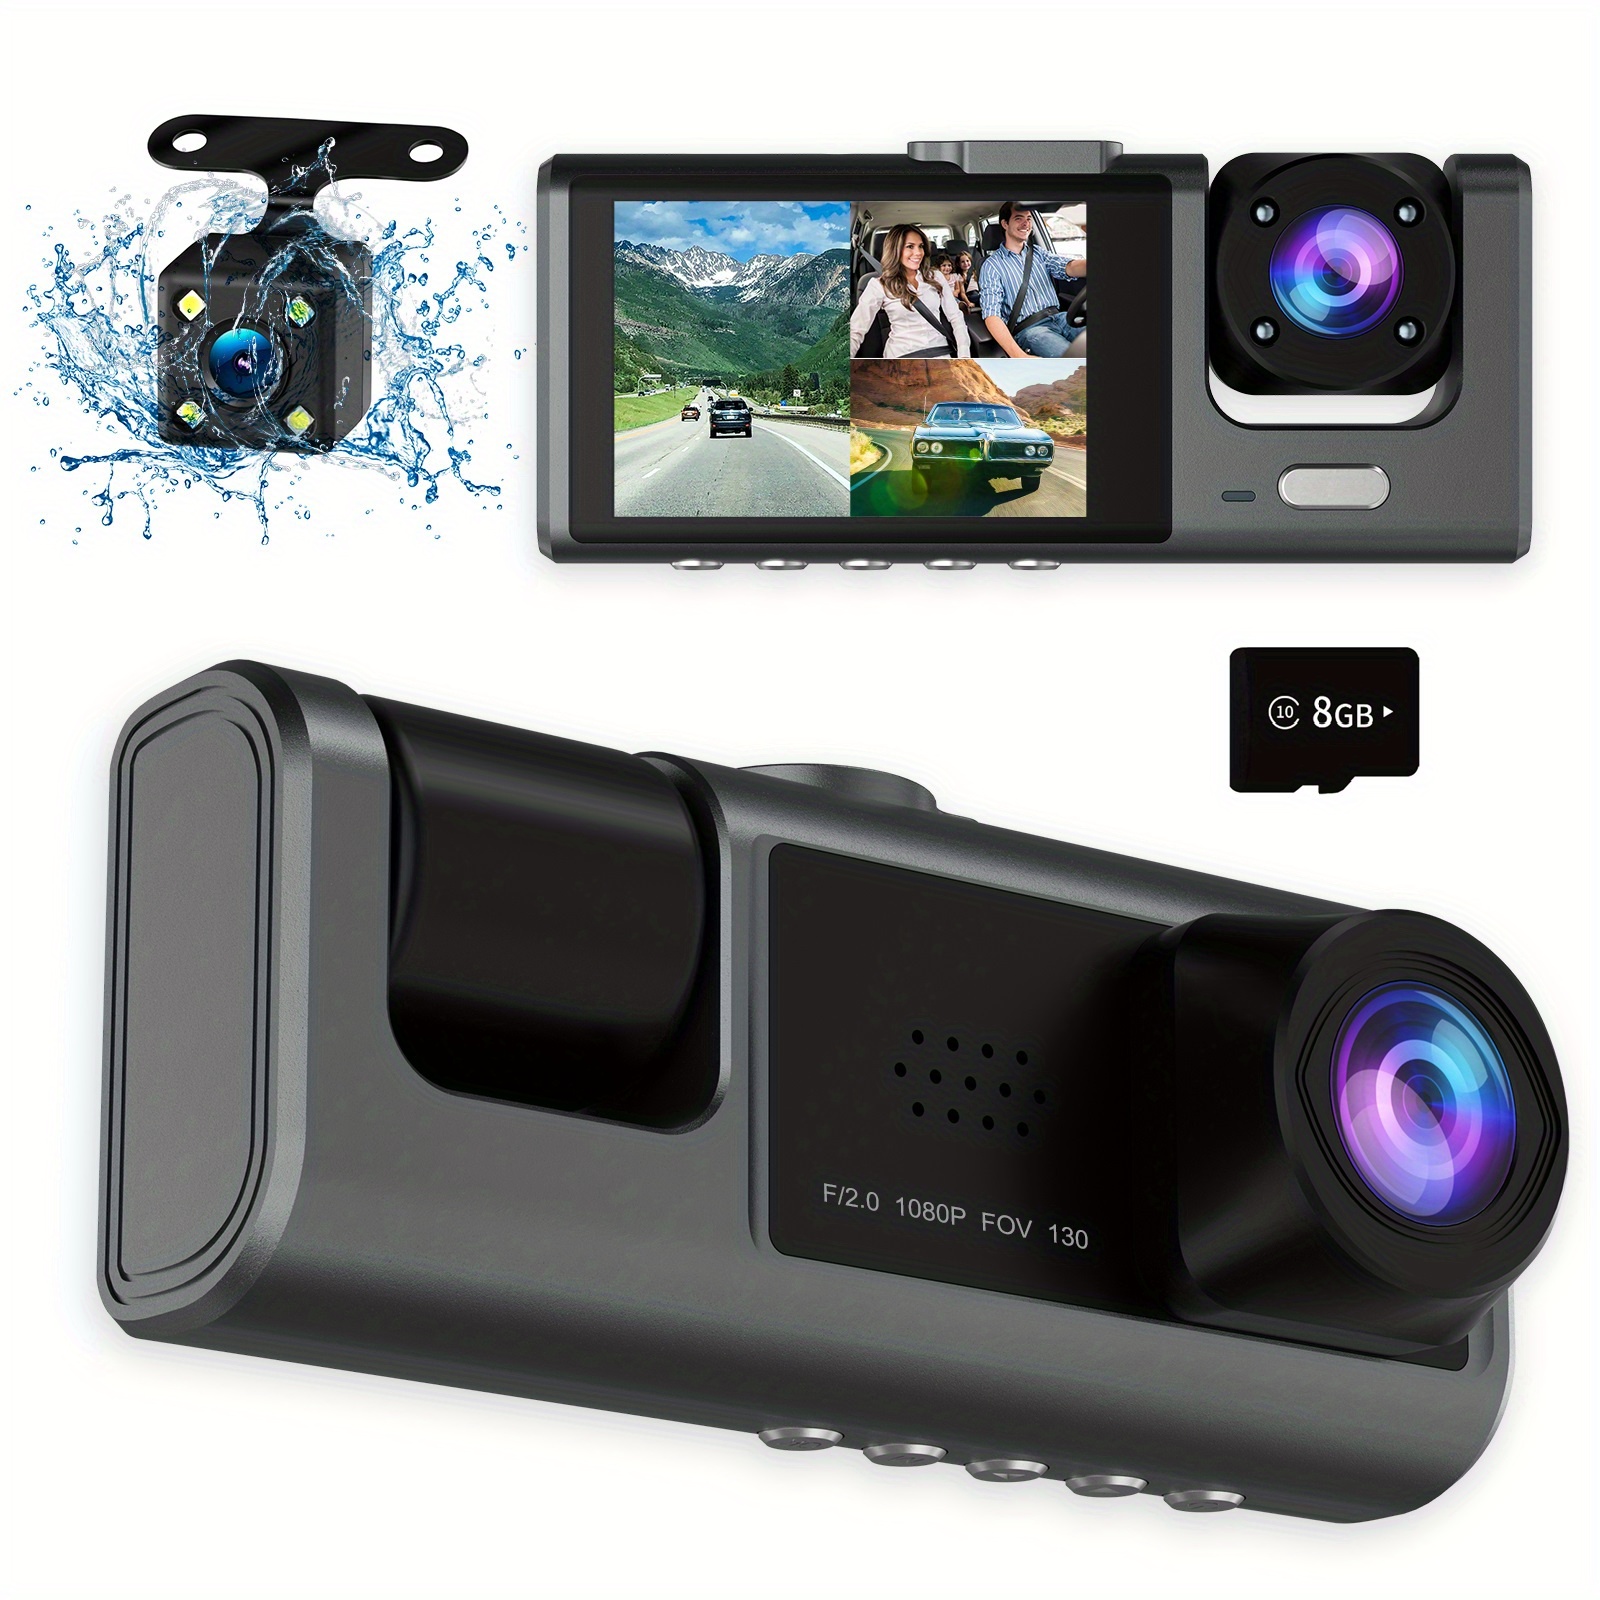 JQVV 3 Channel Dash Cam, 1080P Front and Rear Inside, Dashcam Three Way  Triple Car Camera with IR Night Vision, Loop Recording, G-Sensor, WDR, 24H  Parking Monitor, Support 128GB Max 